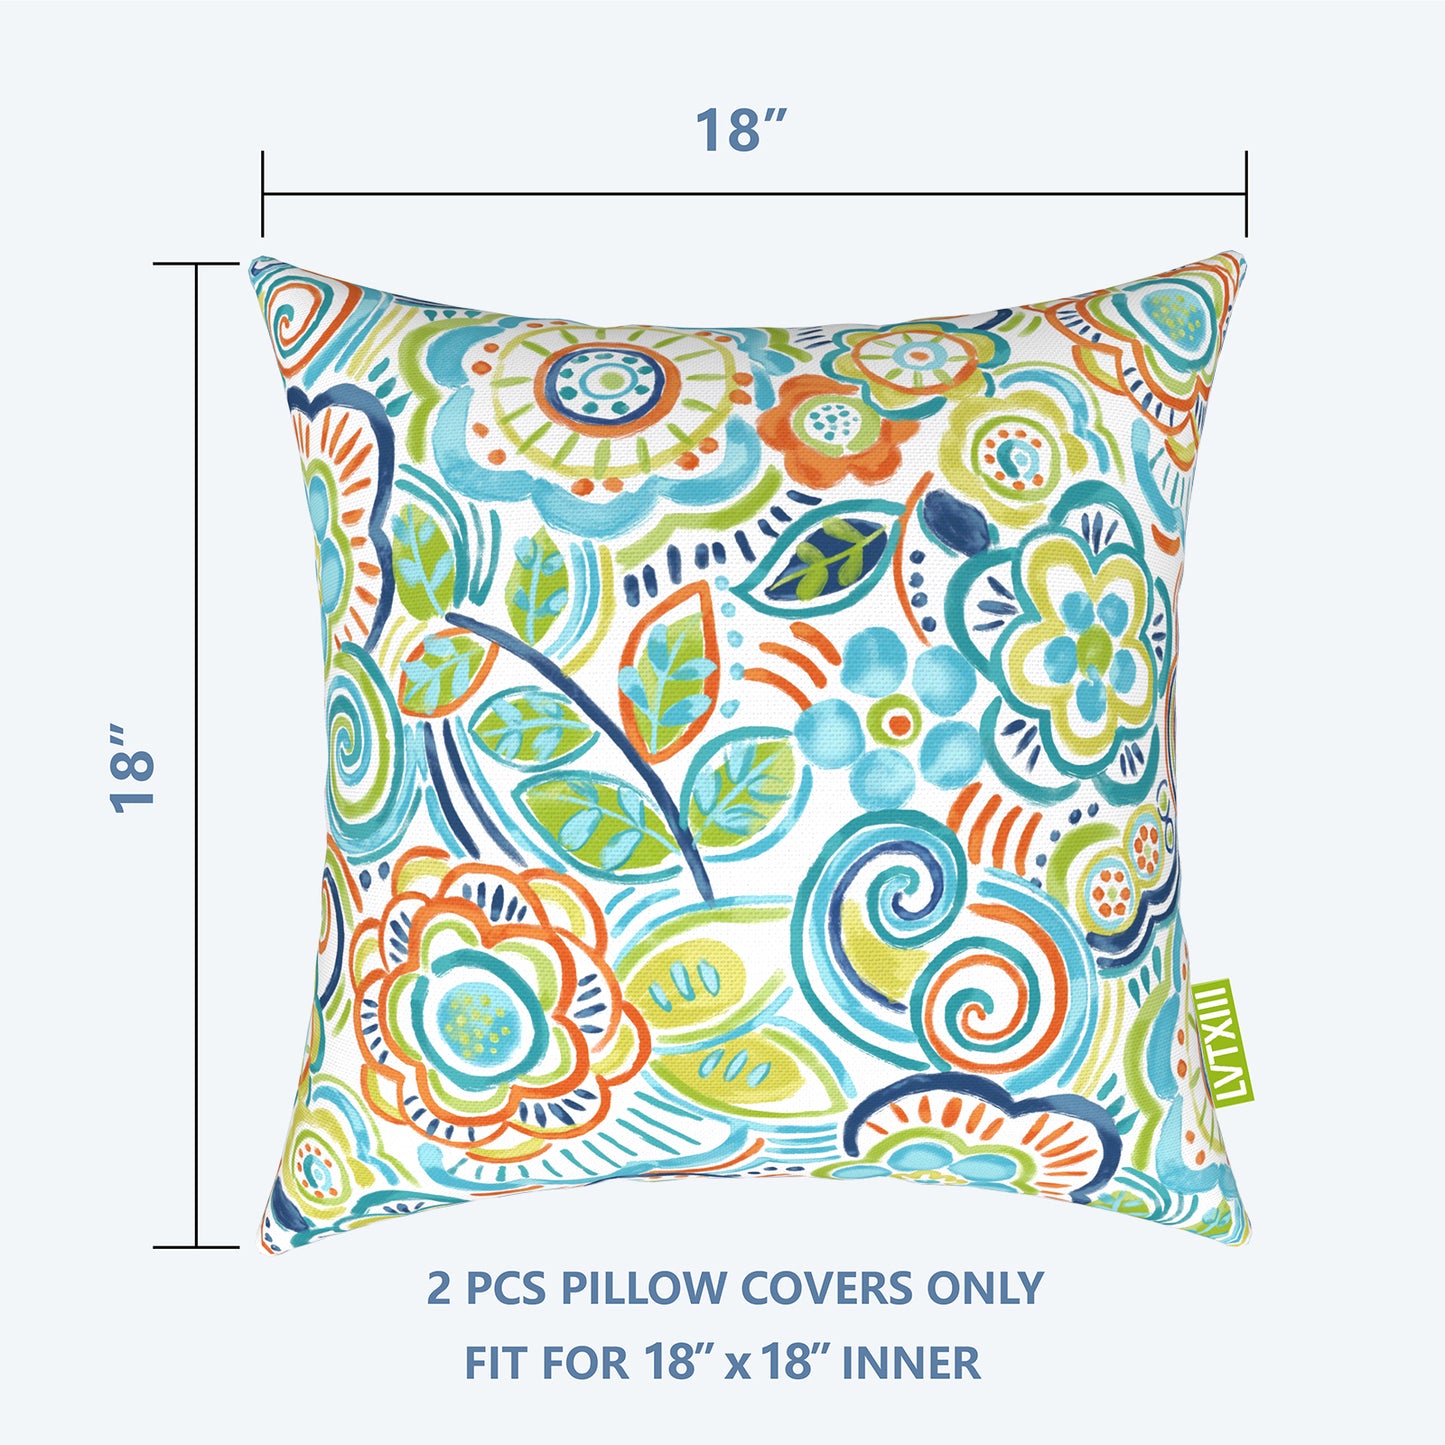 Melody Elephant Outdoor Throw Pillow Covers Pack of 2, Decorative Water Repellent Square Pillow Cases 18x18 Inch, Patio Pillowcases for Home Patio Furniture Use, Flower Blue